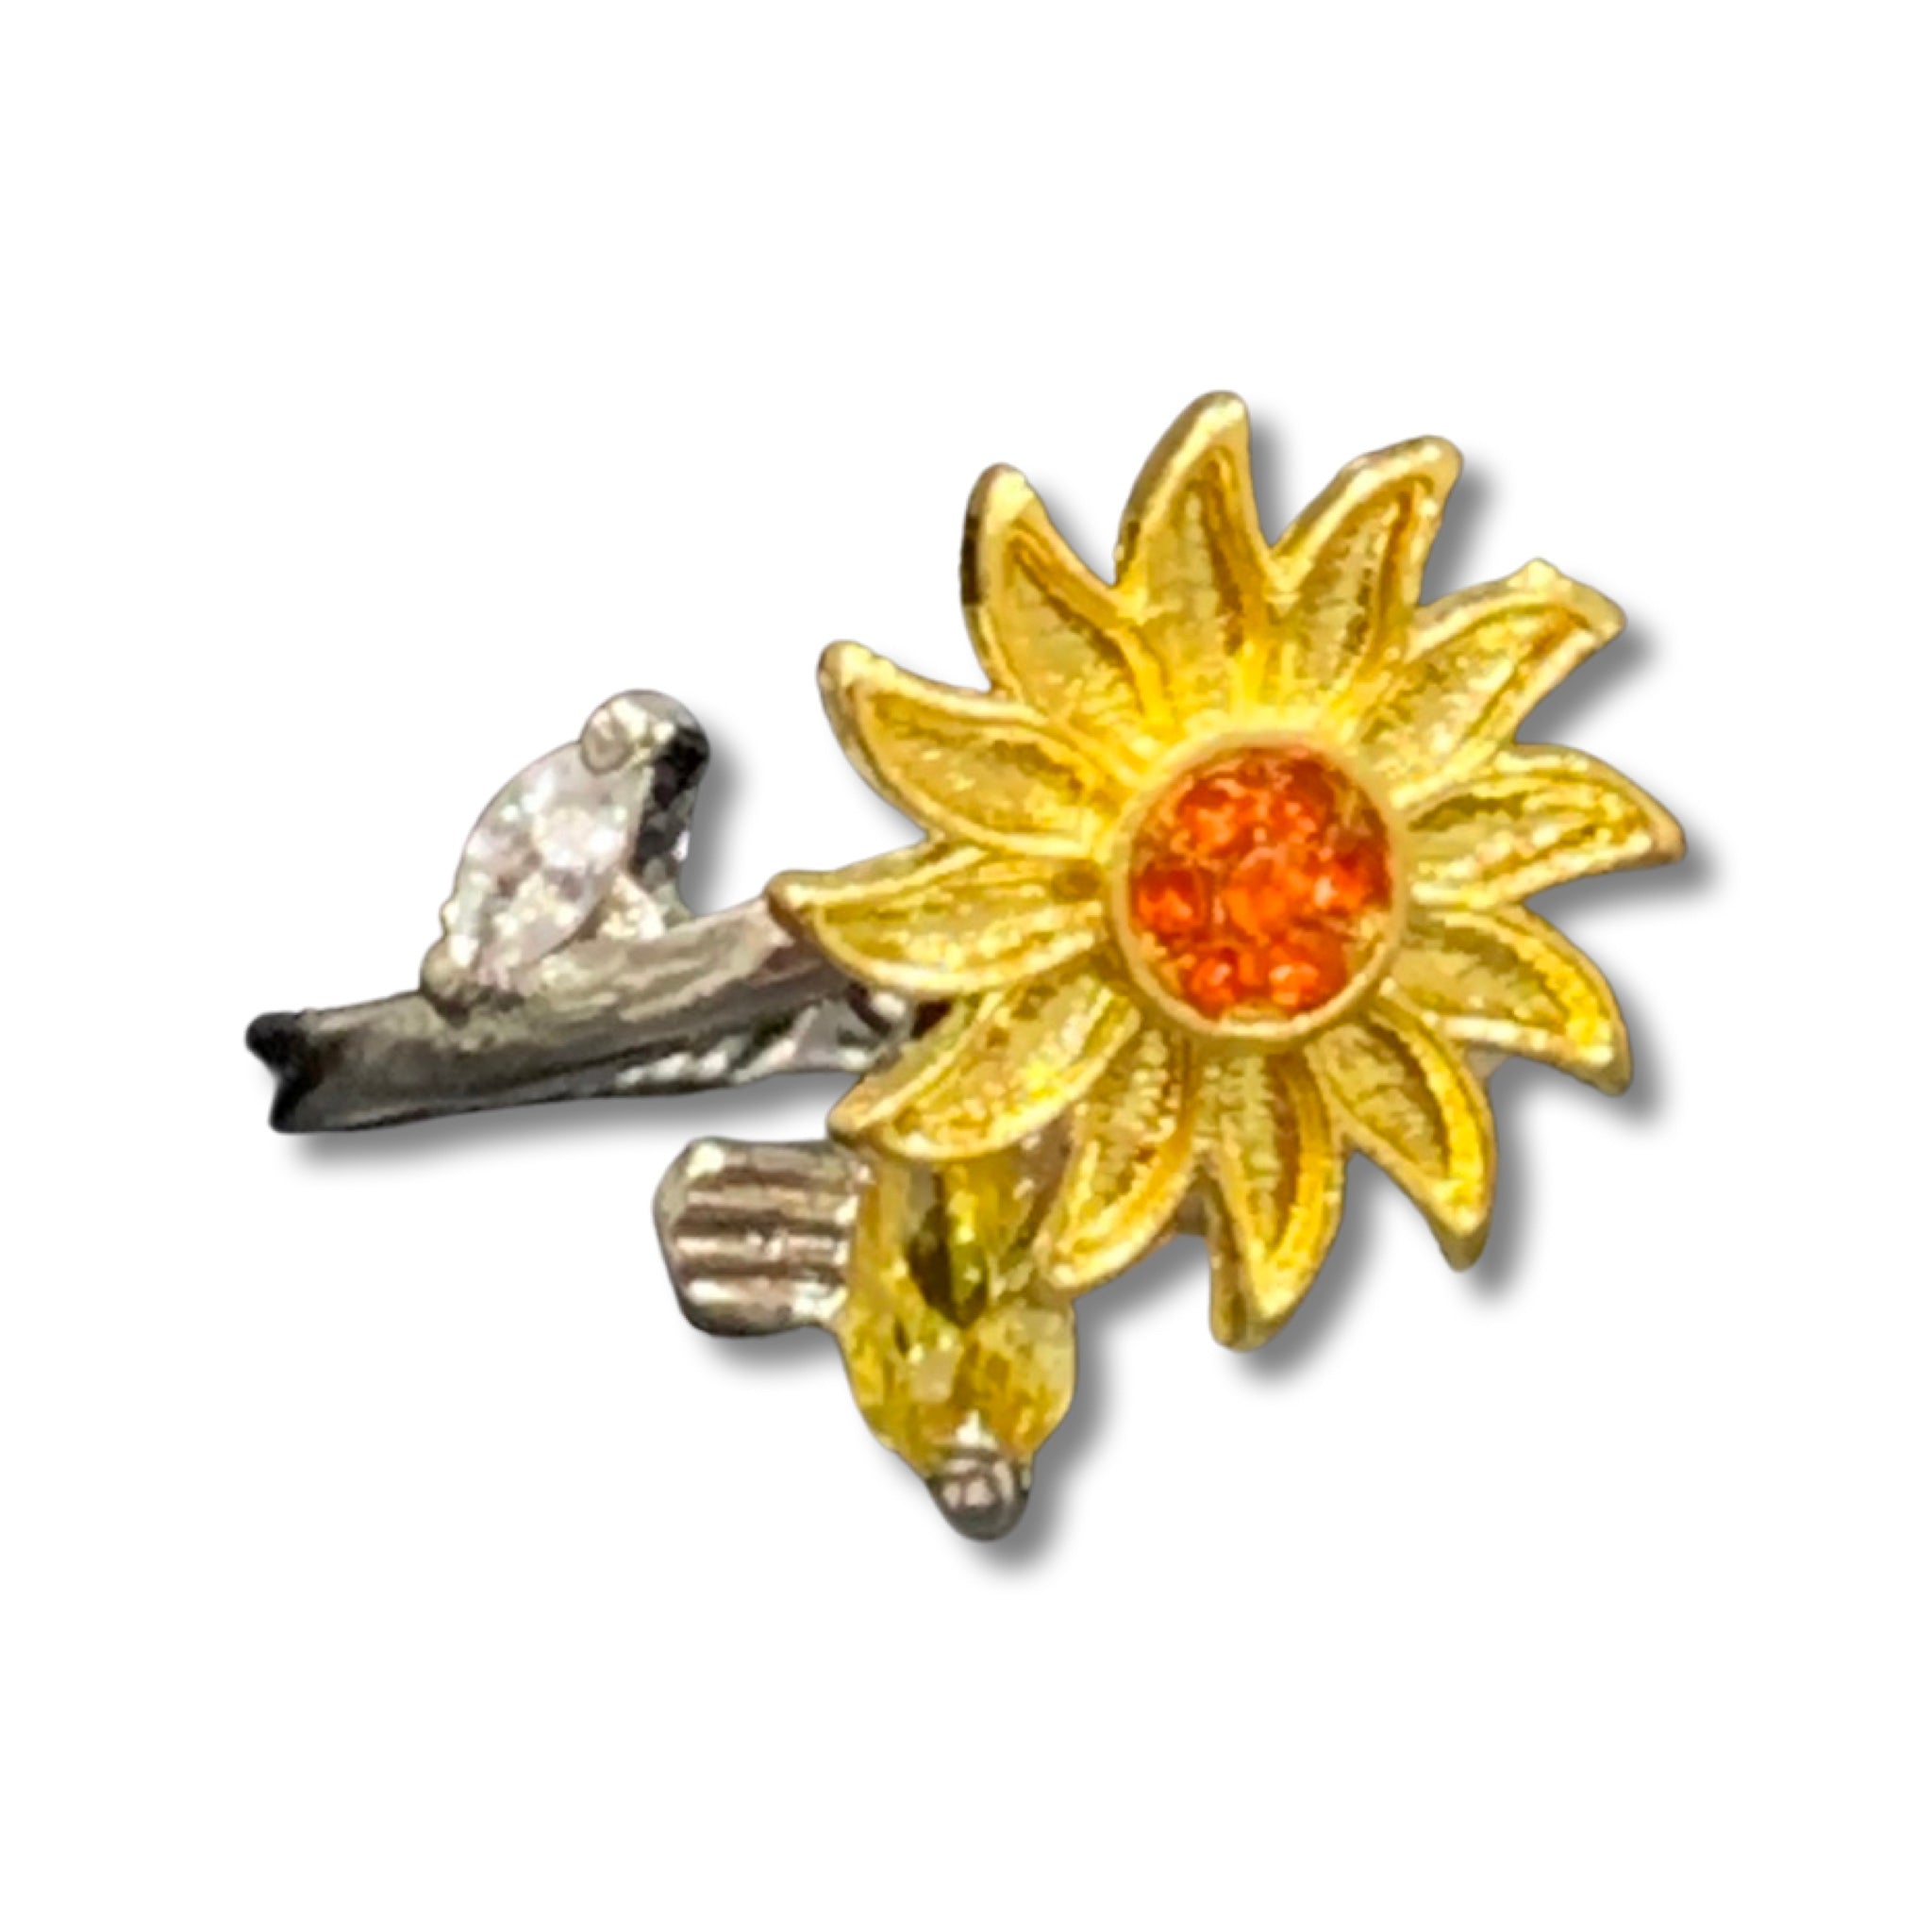 Silver ring with Gold Flower (J0012)